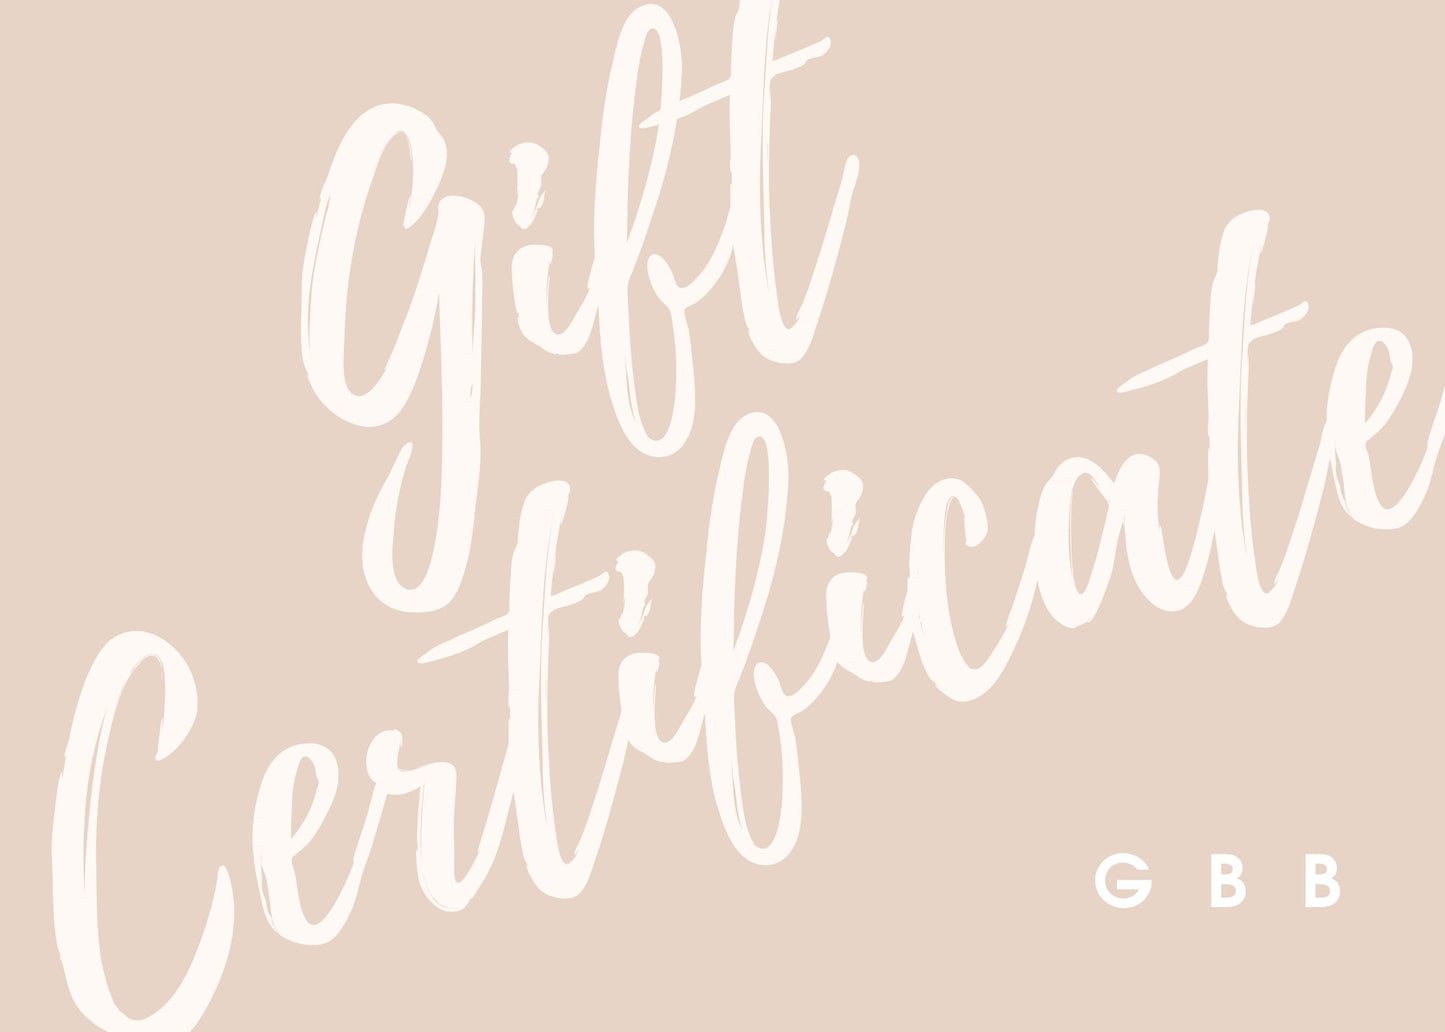 GBB Gift cards